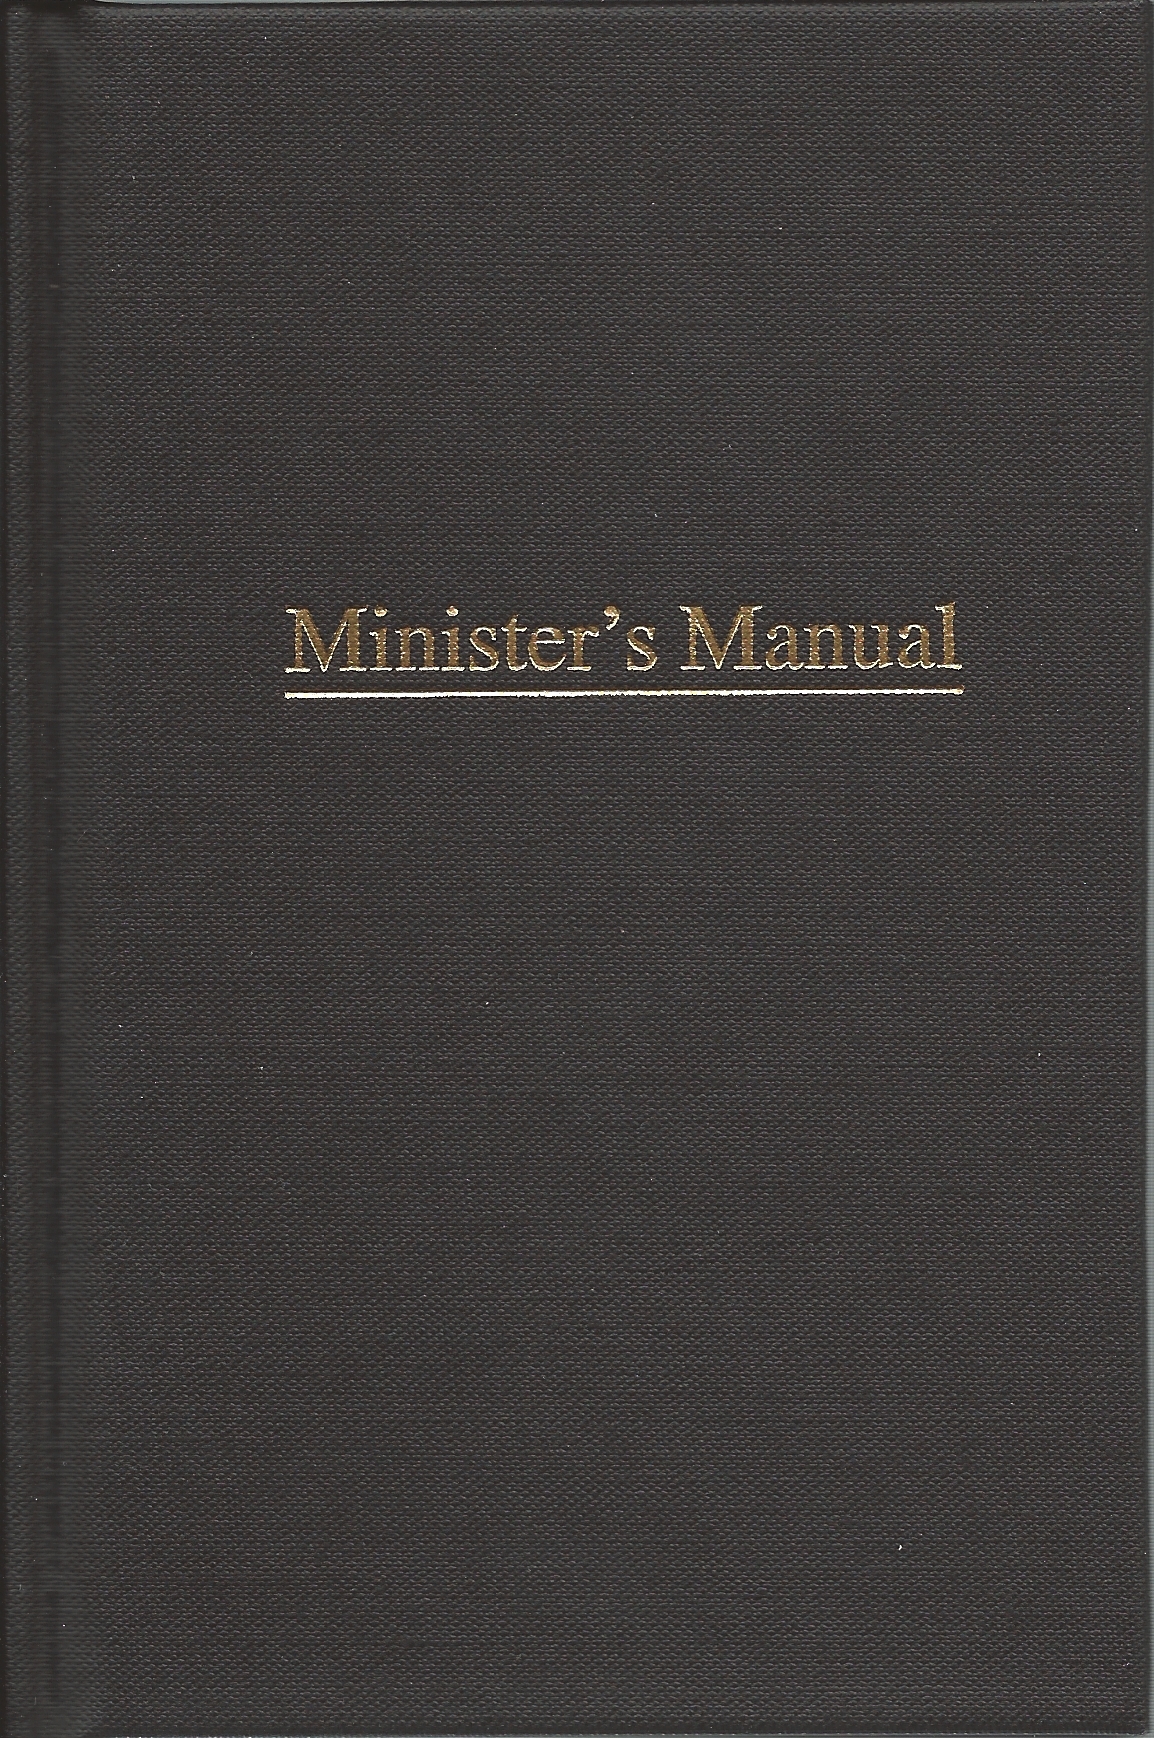 MINISTER'S MANUAL Lamp & Light Publishers - Click Image to Close